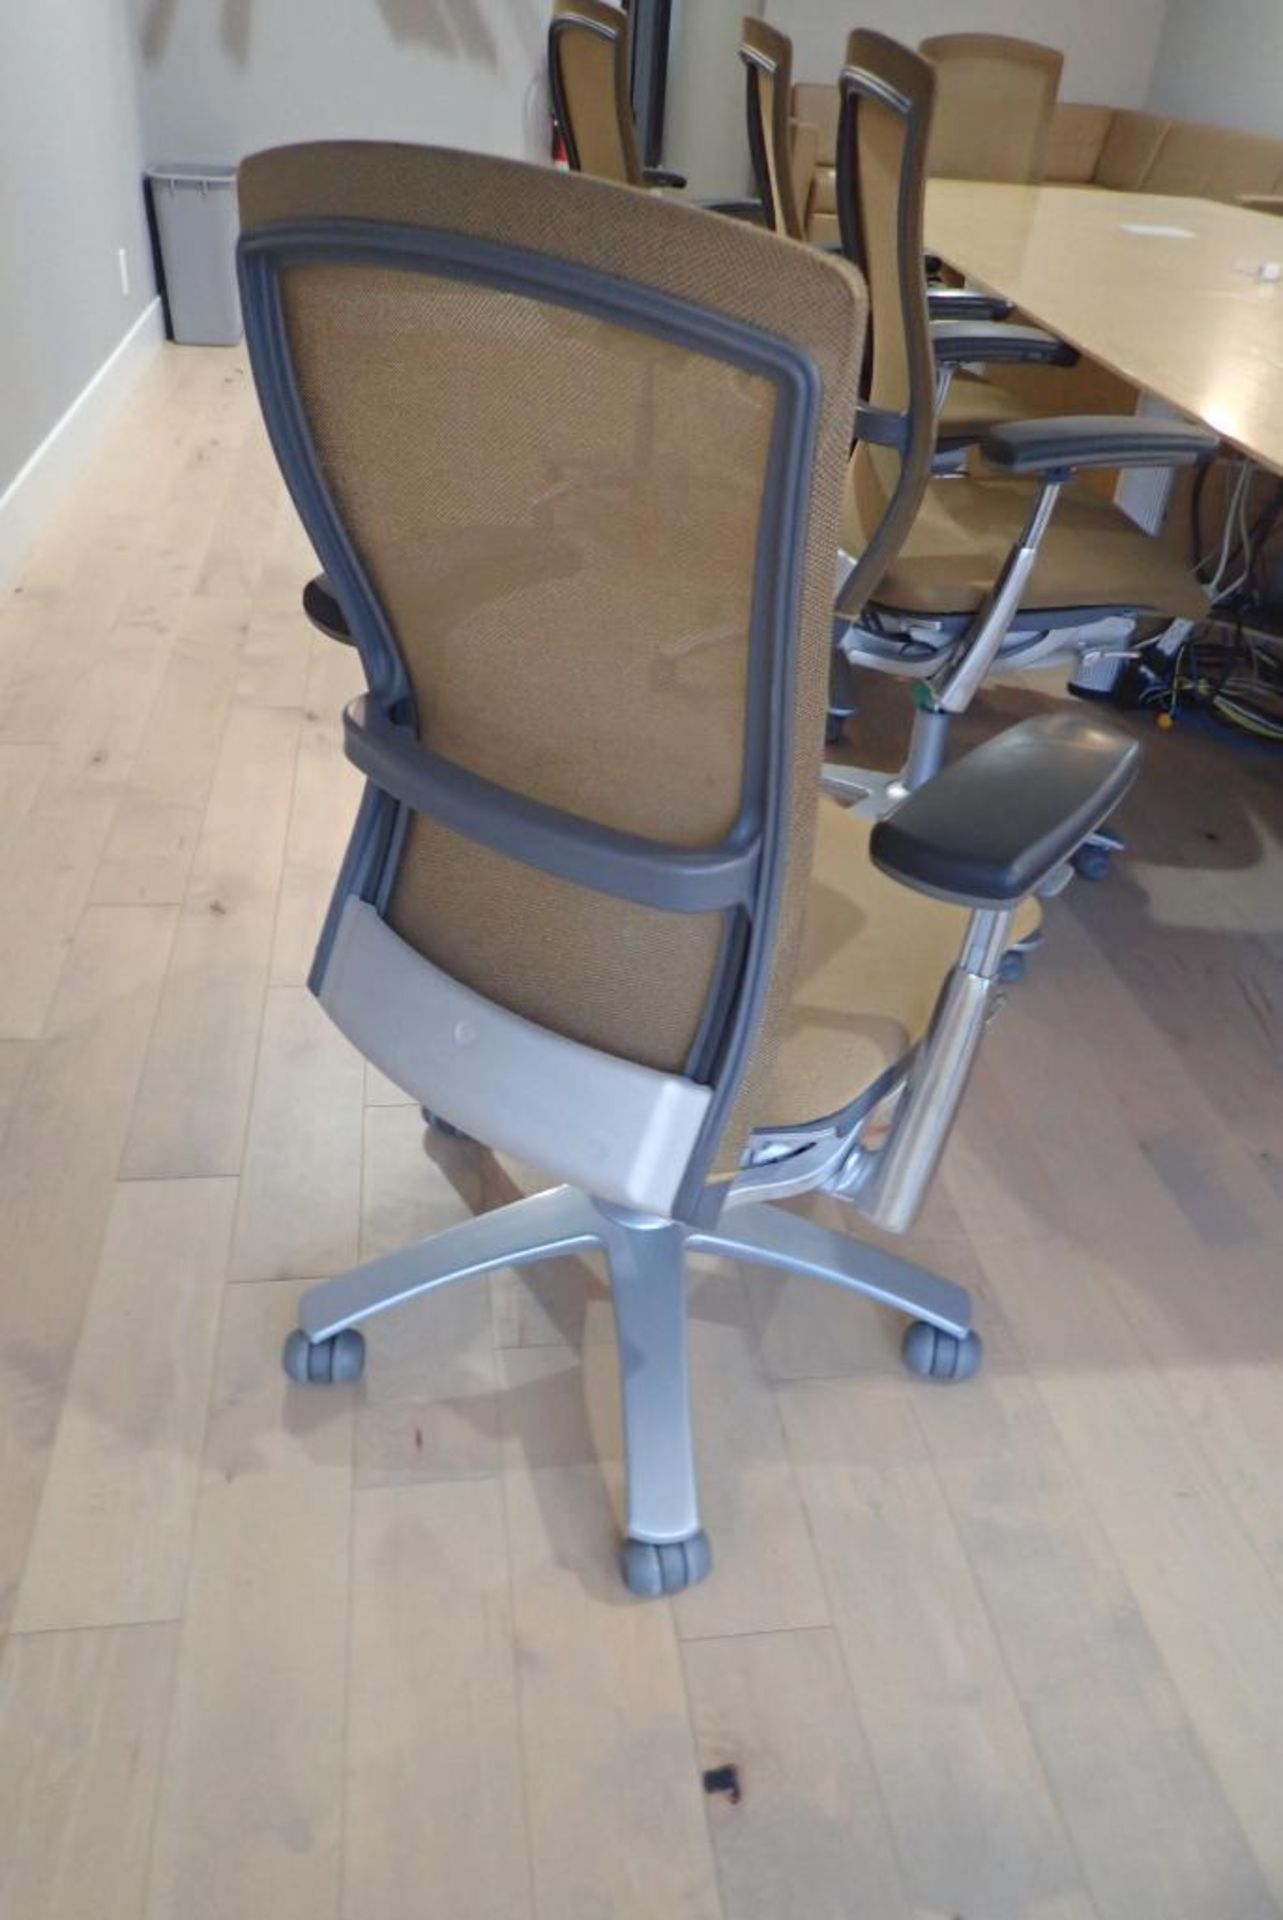 Hydraulic Mesh Back Task Chair. - Image 2 of 2